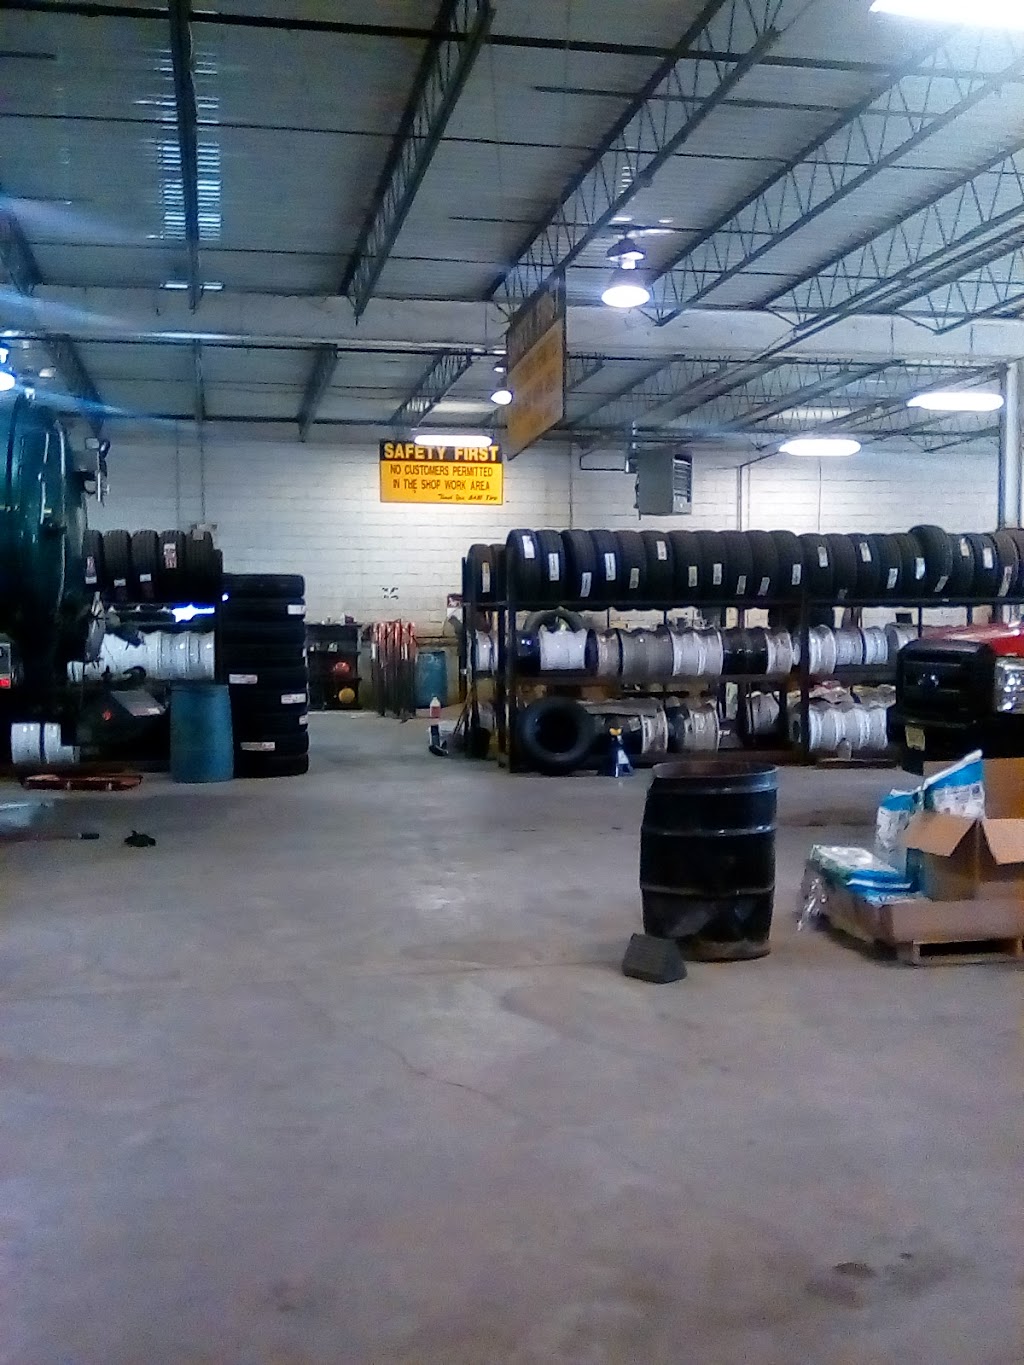 A & M Truck Tire Services | 612 William Leigh Dr, Tullytown, PA 19007 | Phone: (215) 547-9442